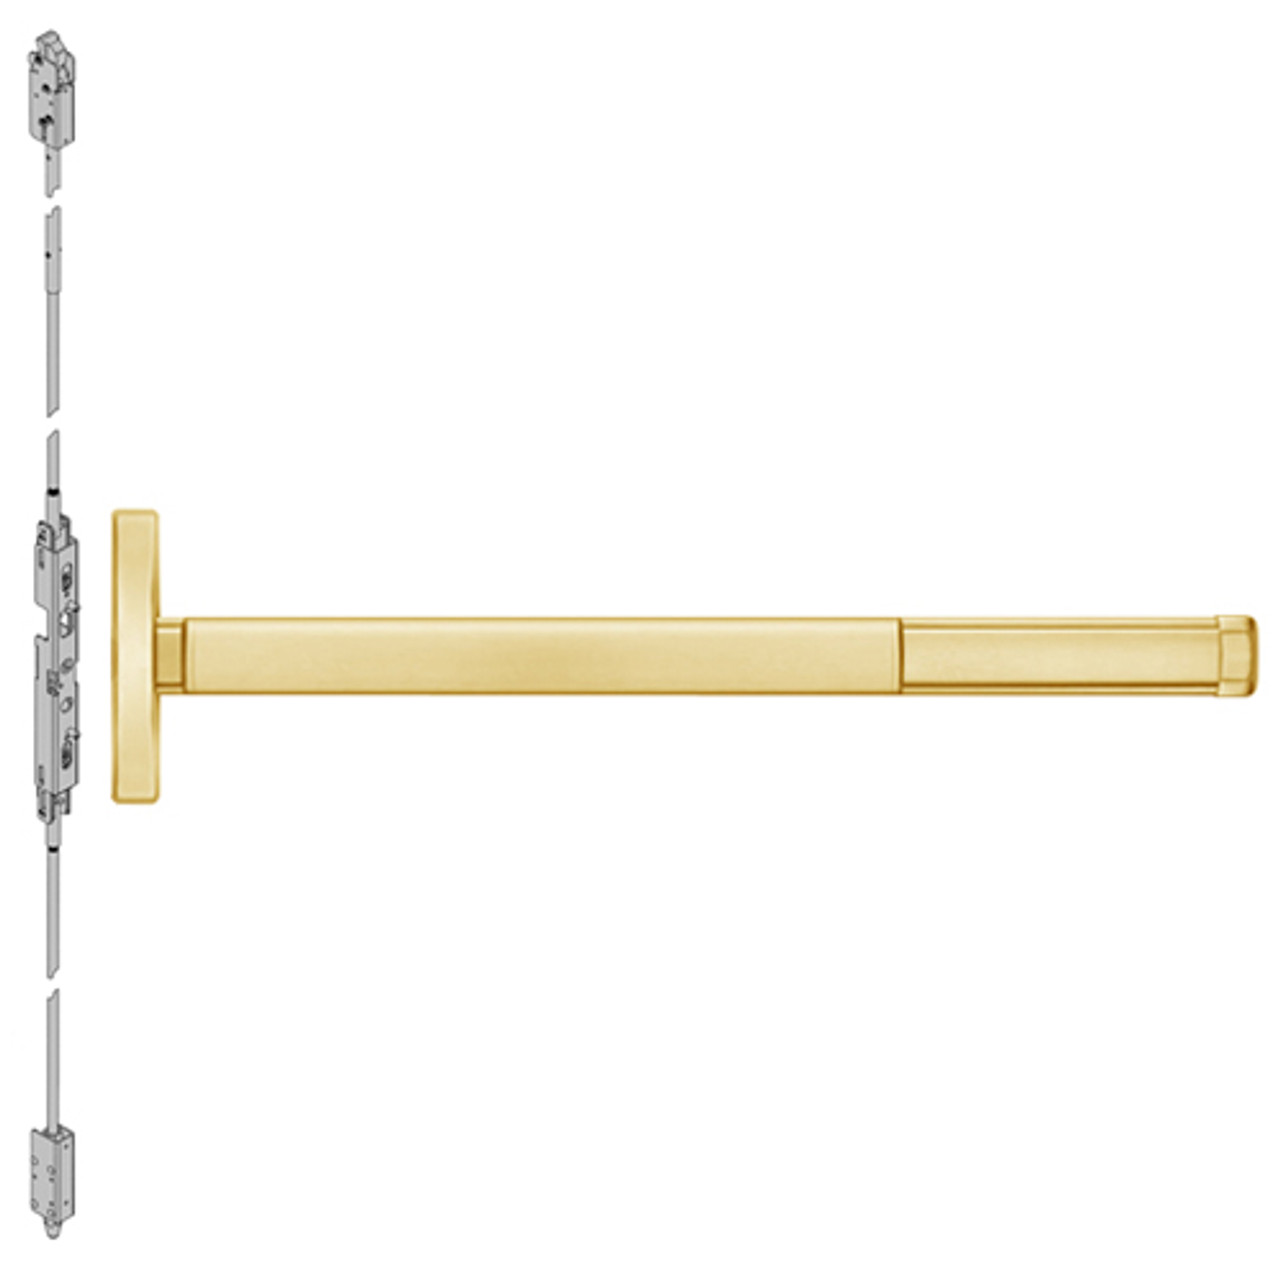 2603LBR-605-36 PHI 2600 Series Non Fire Rated Concealed Vertical Rod Exit Device Prepped for Key Retracts Latchbolt with Less Bottom Rod in Bright Brass Finish